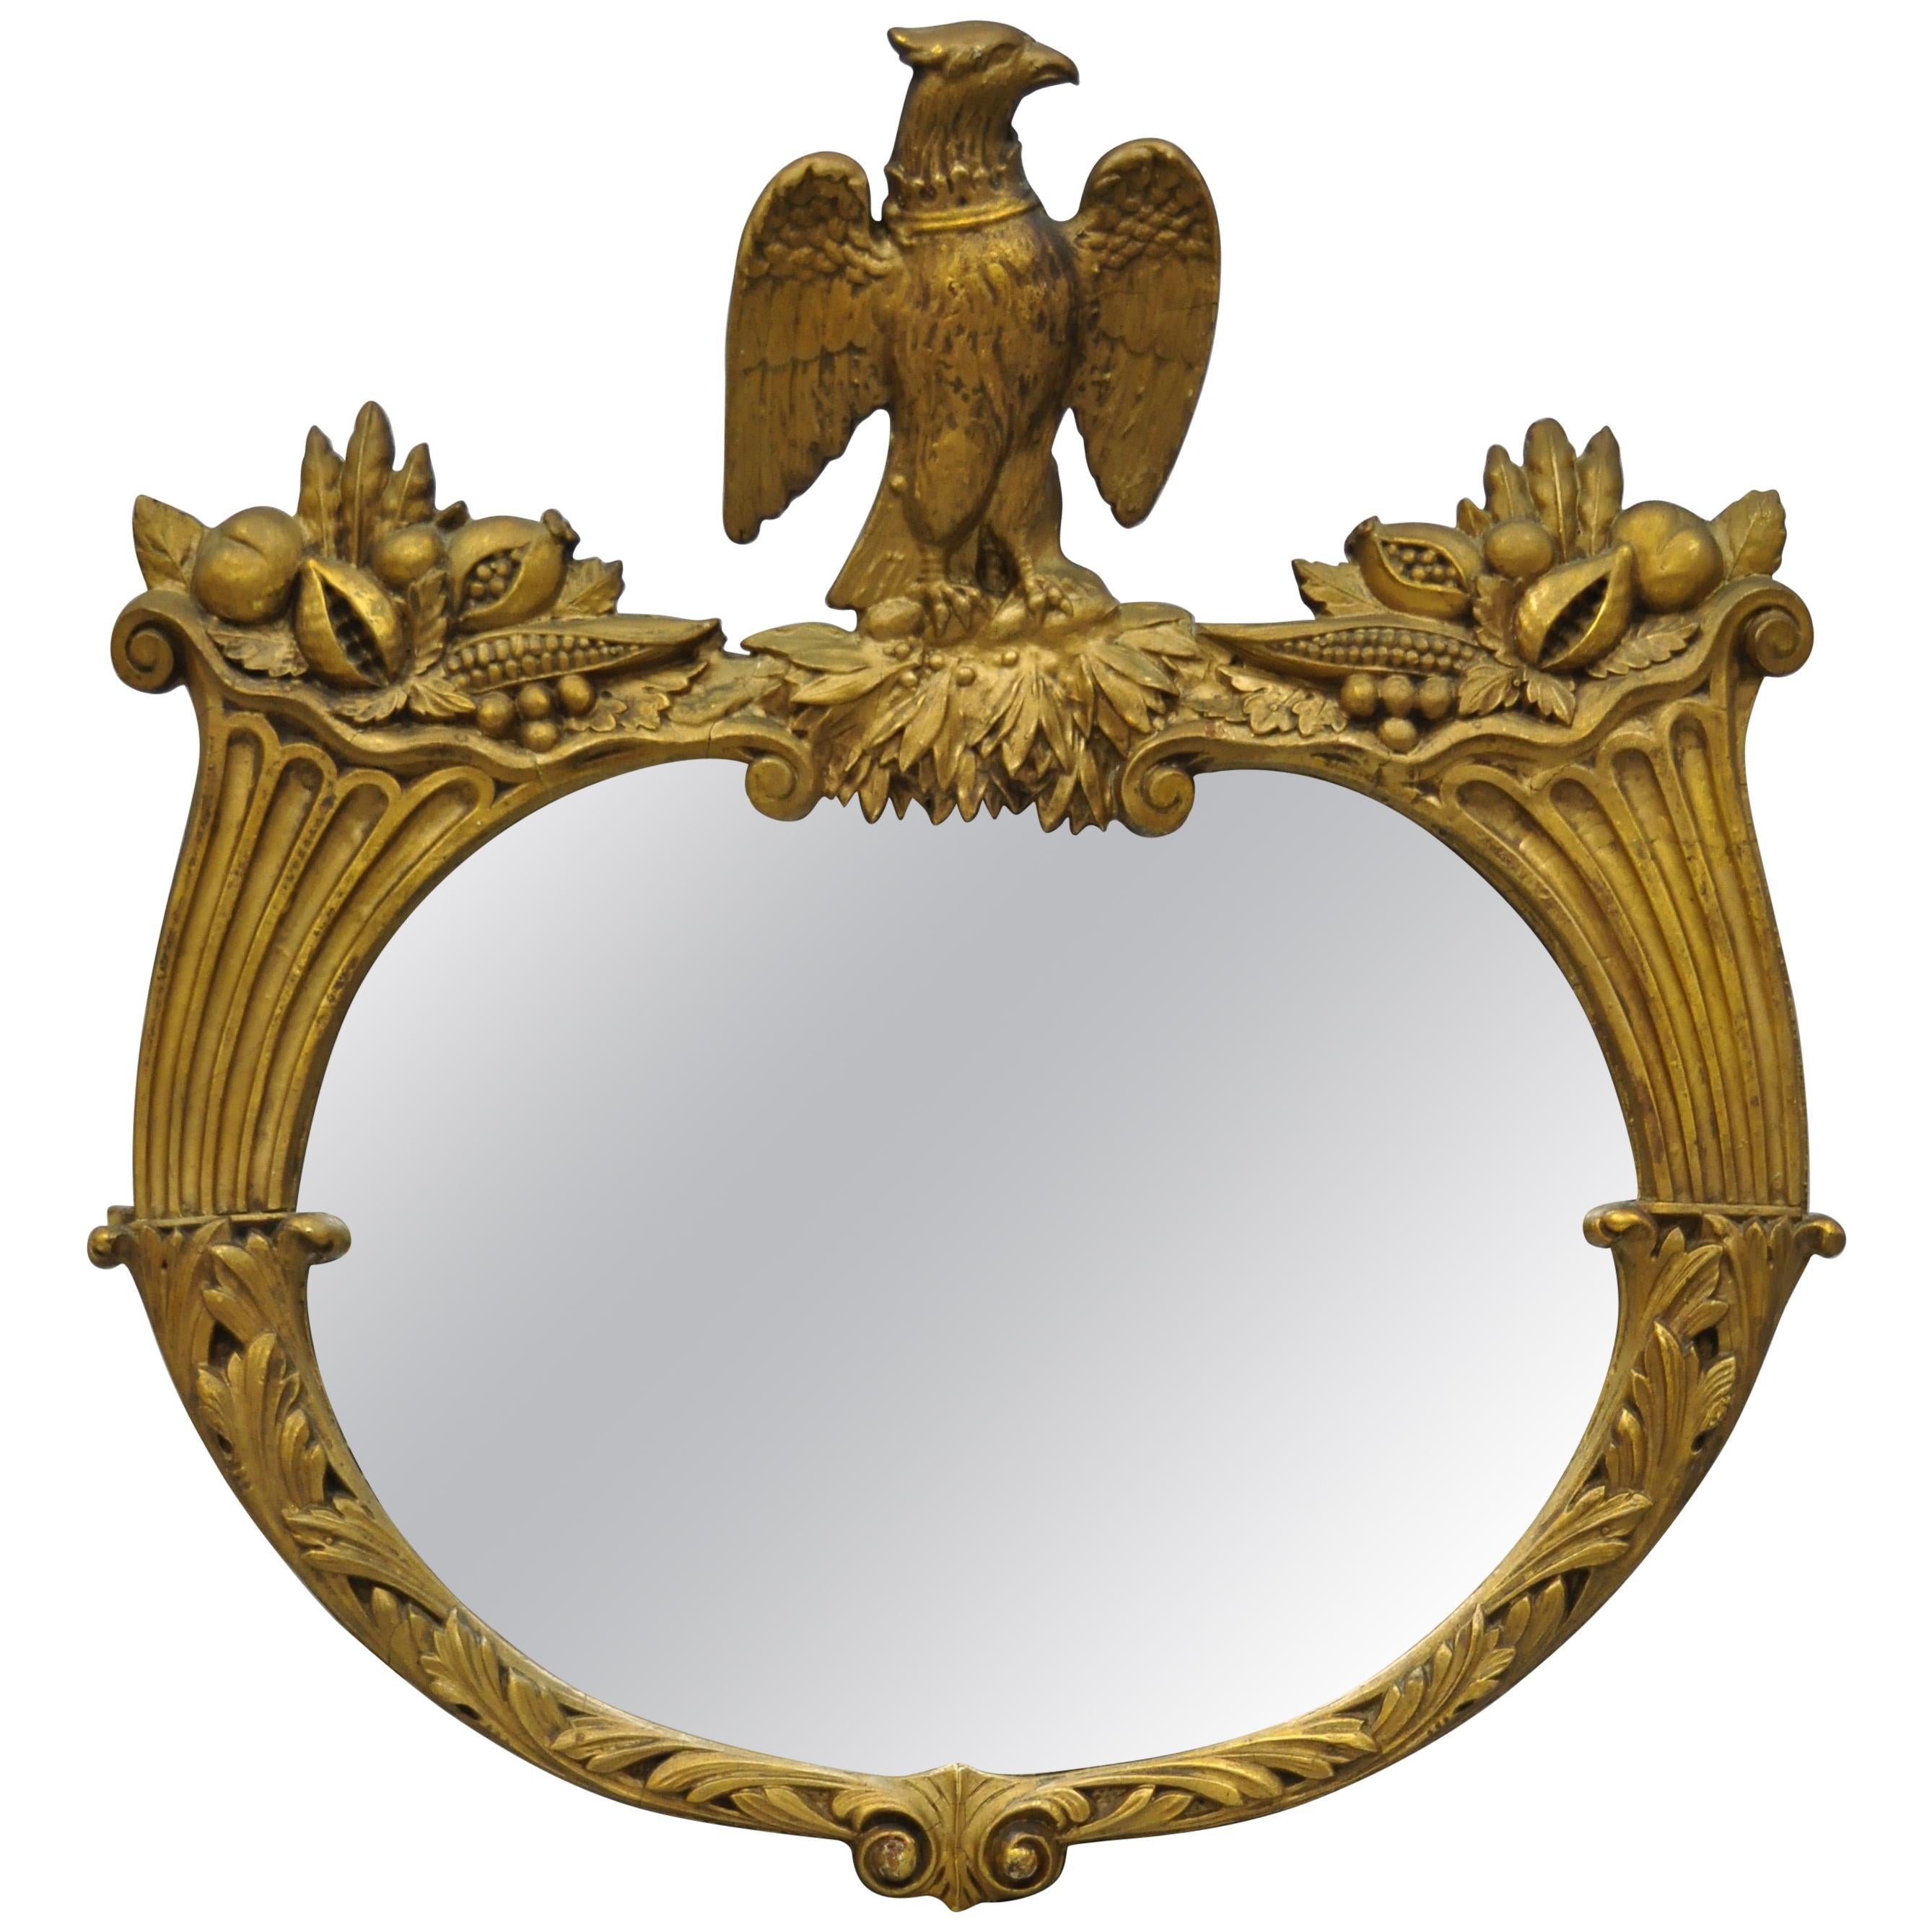 Antique Gold Gilt Gesso Federal Style Wall Mirror with Eagle and Cornucopia